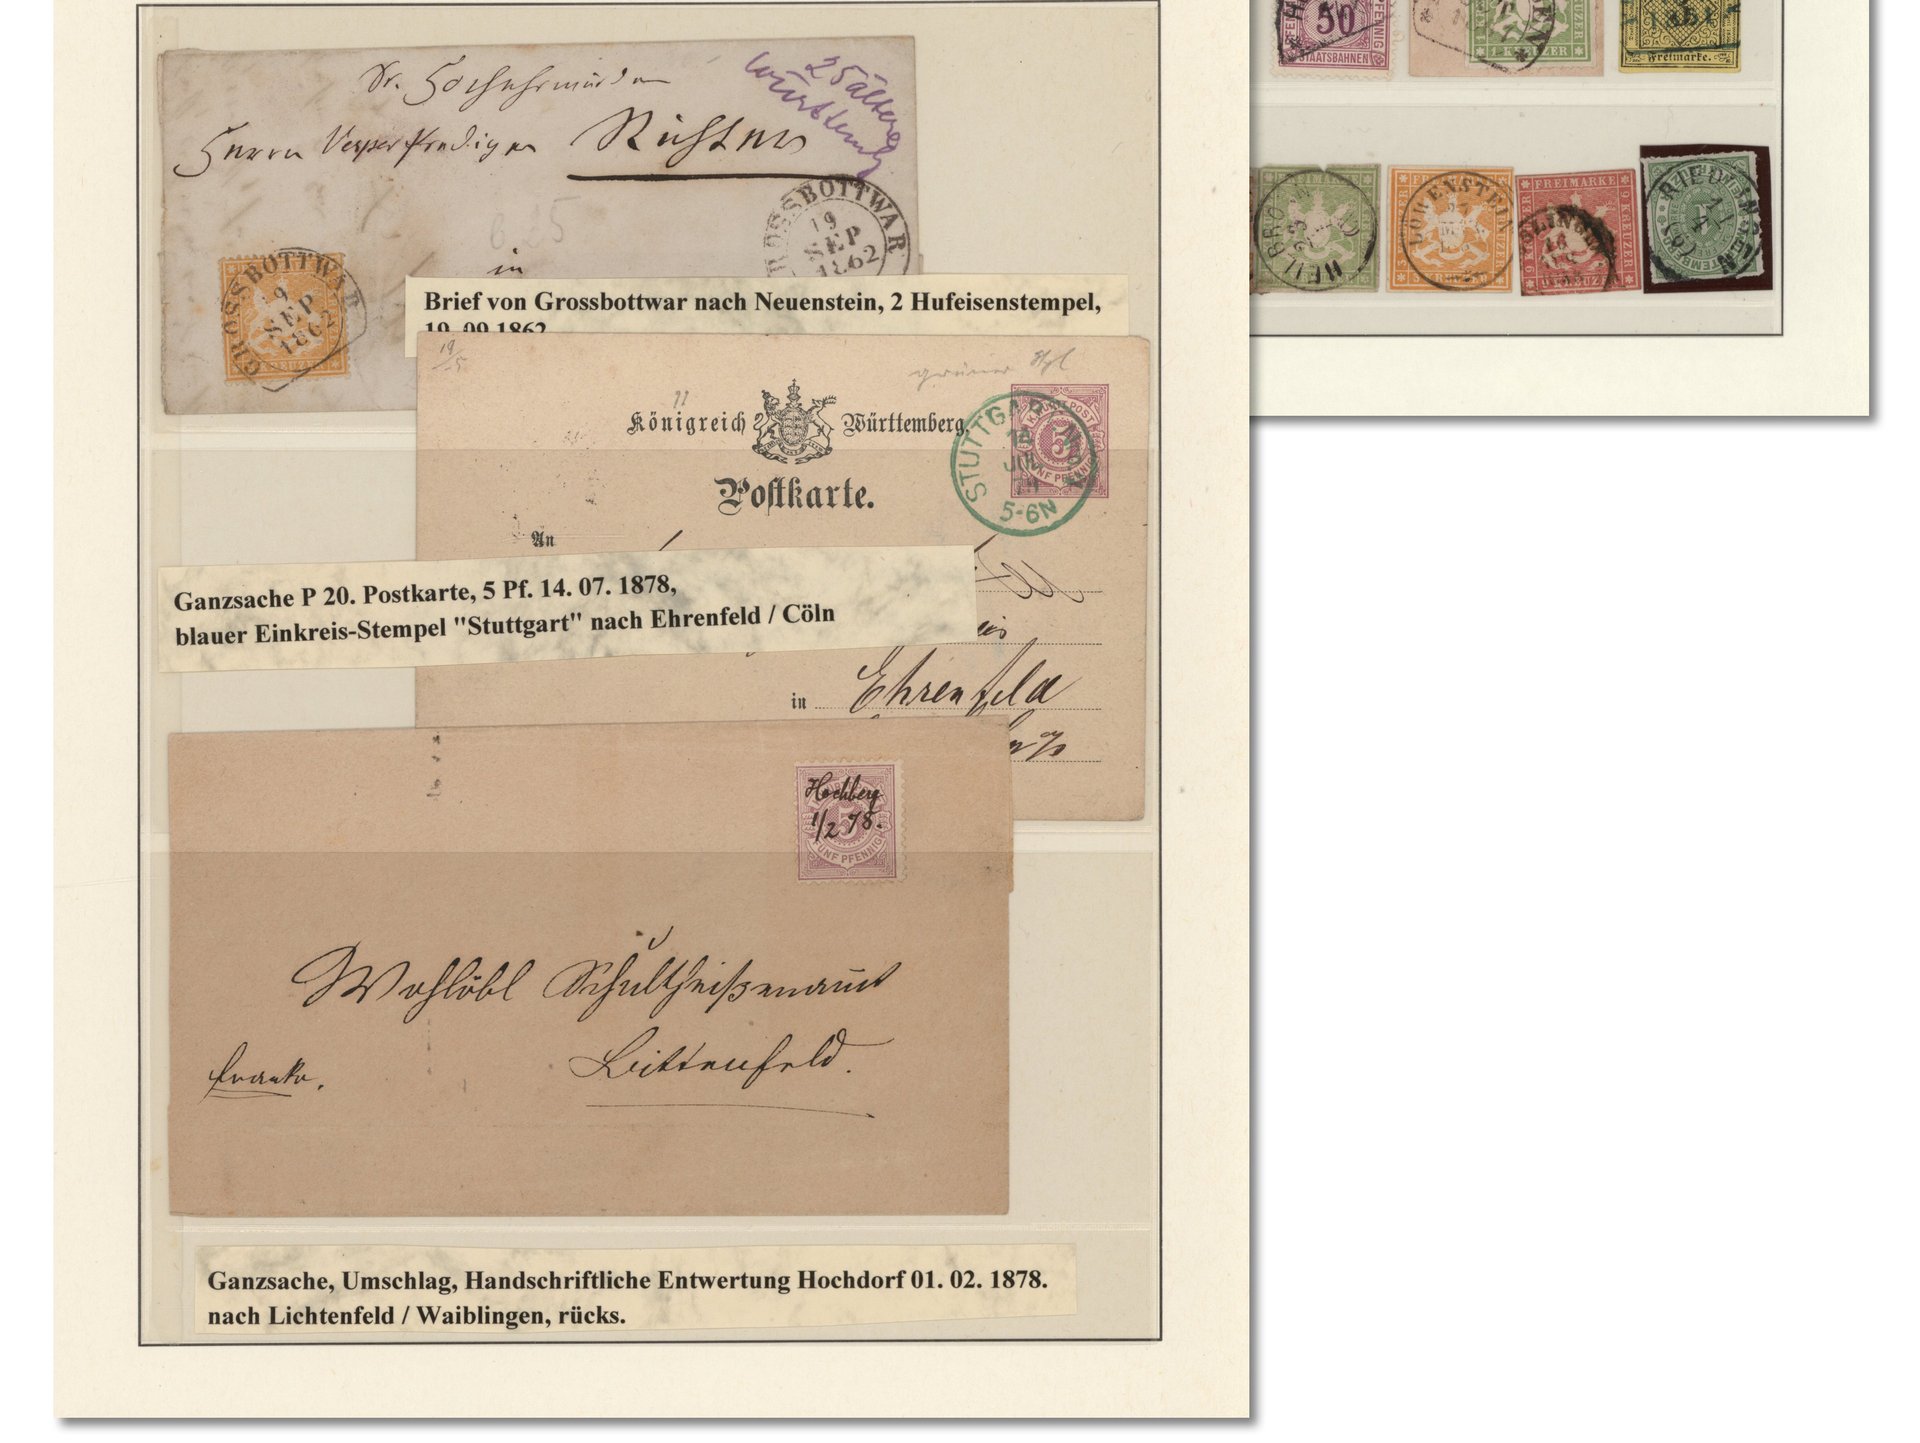 two pages of an album with the postmarks of the Kingdom of Württemberg with two-circle, three-circle, horseshoe, railway postmarks etc.